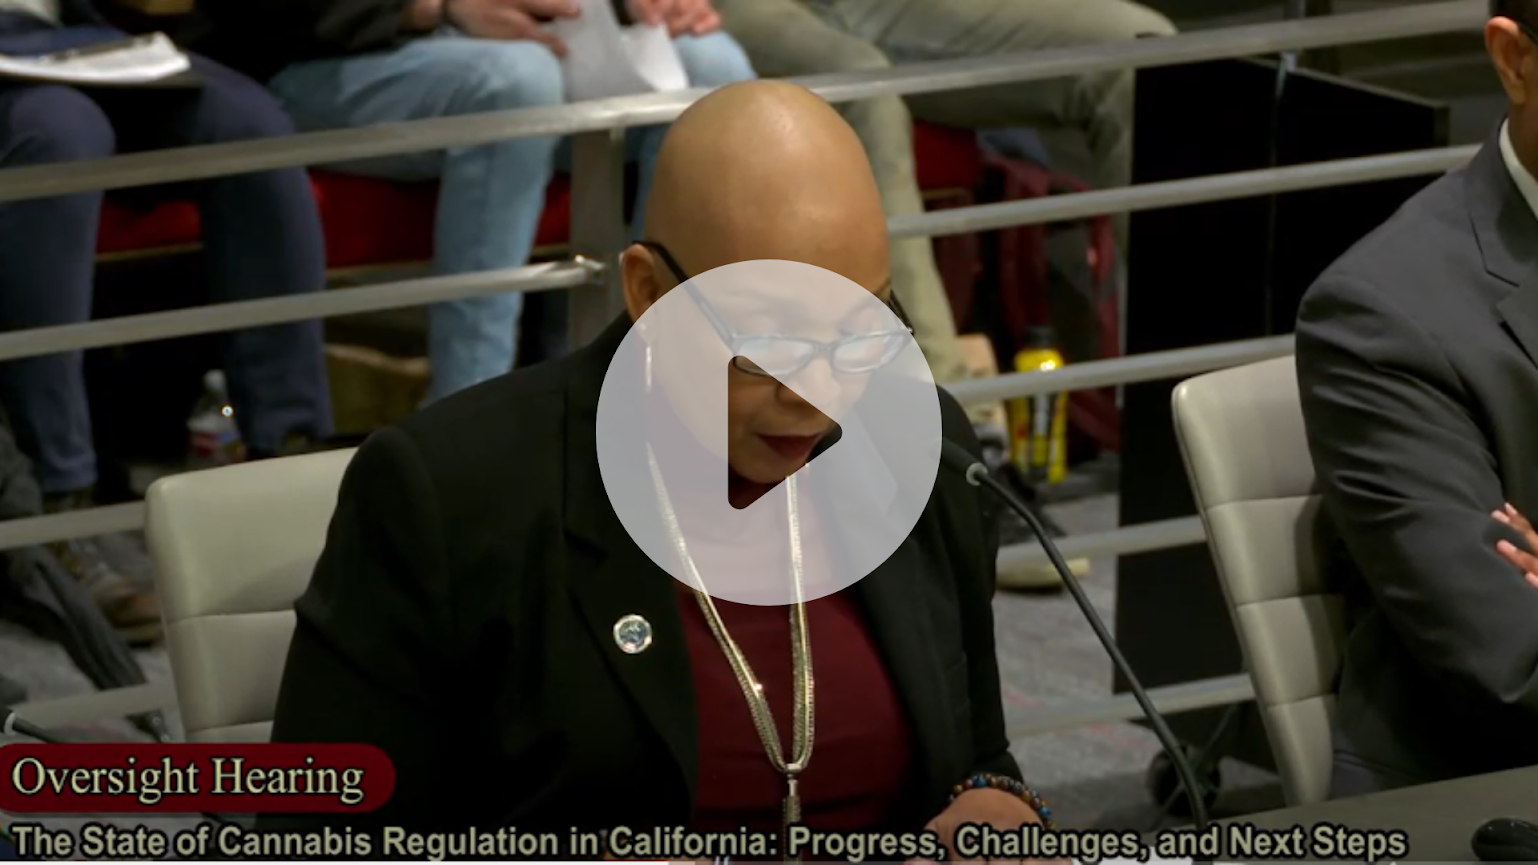 The State of Cannabis Regulation in California